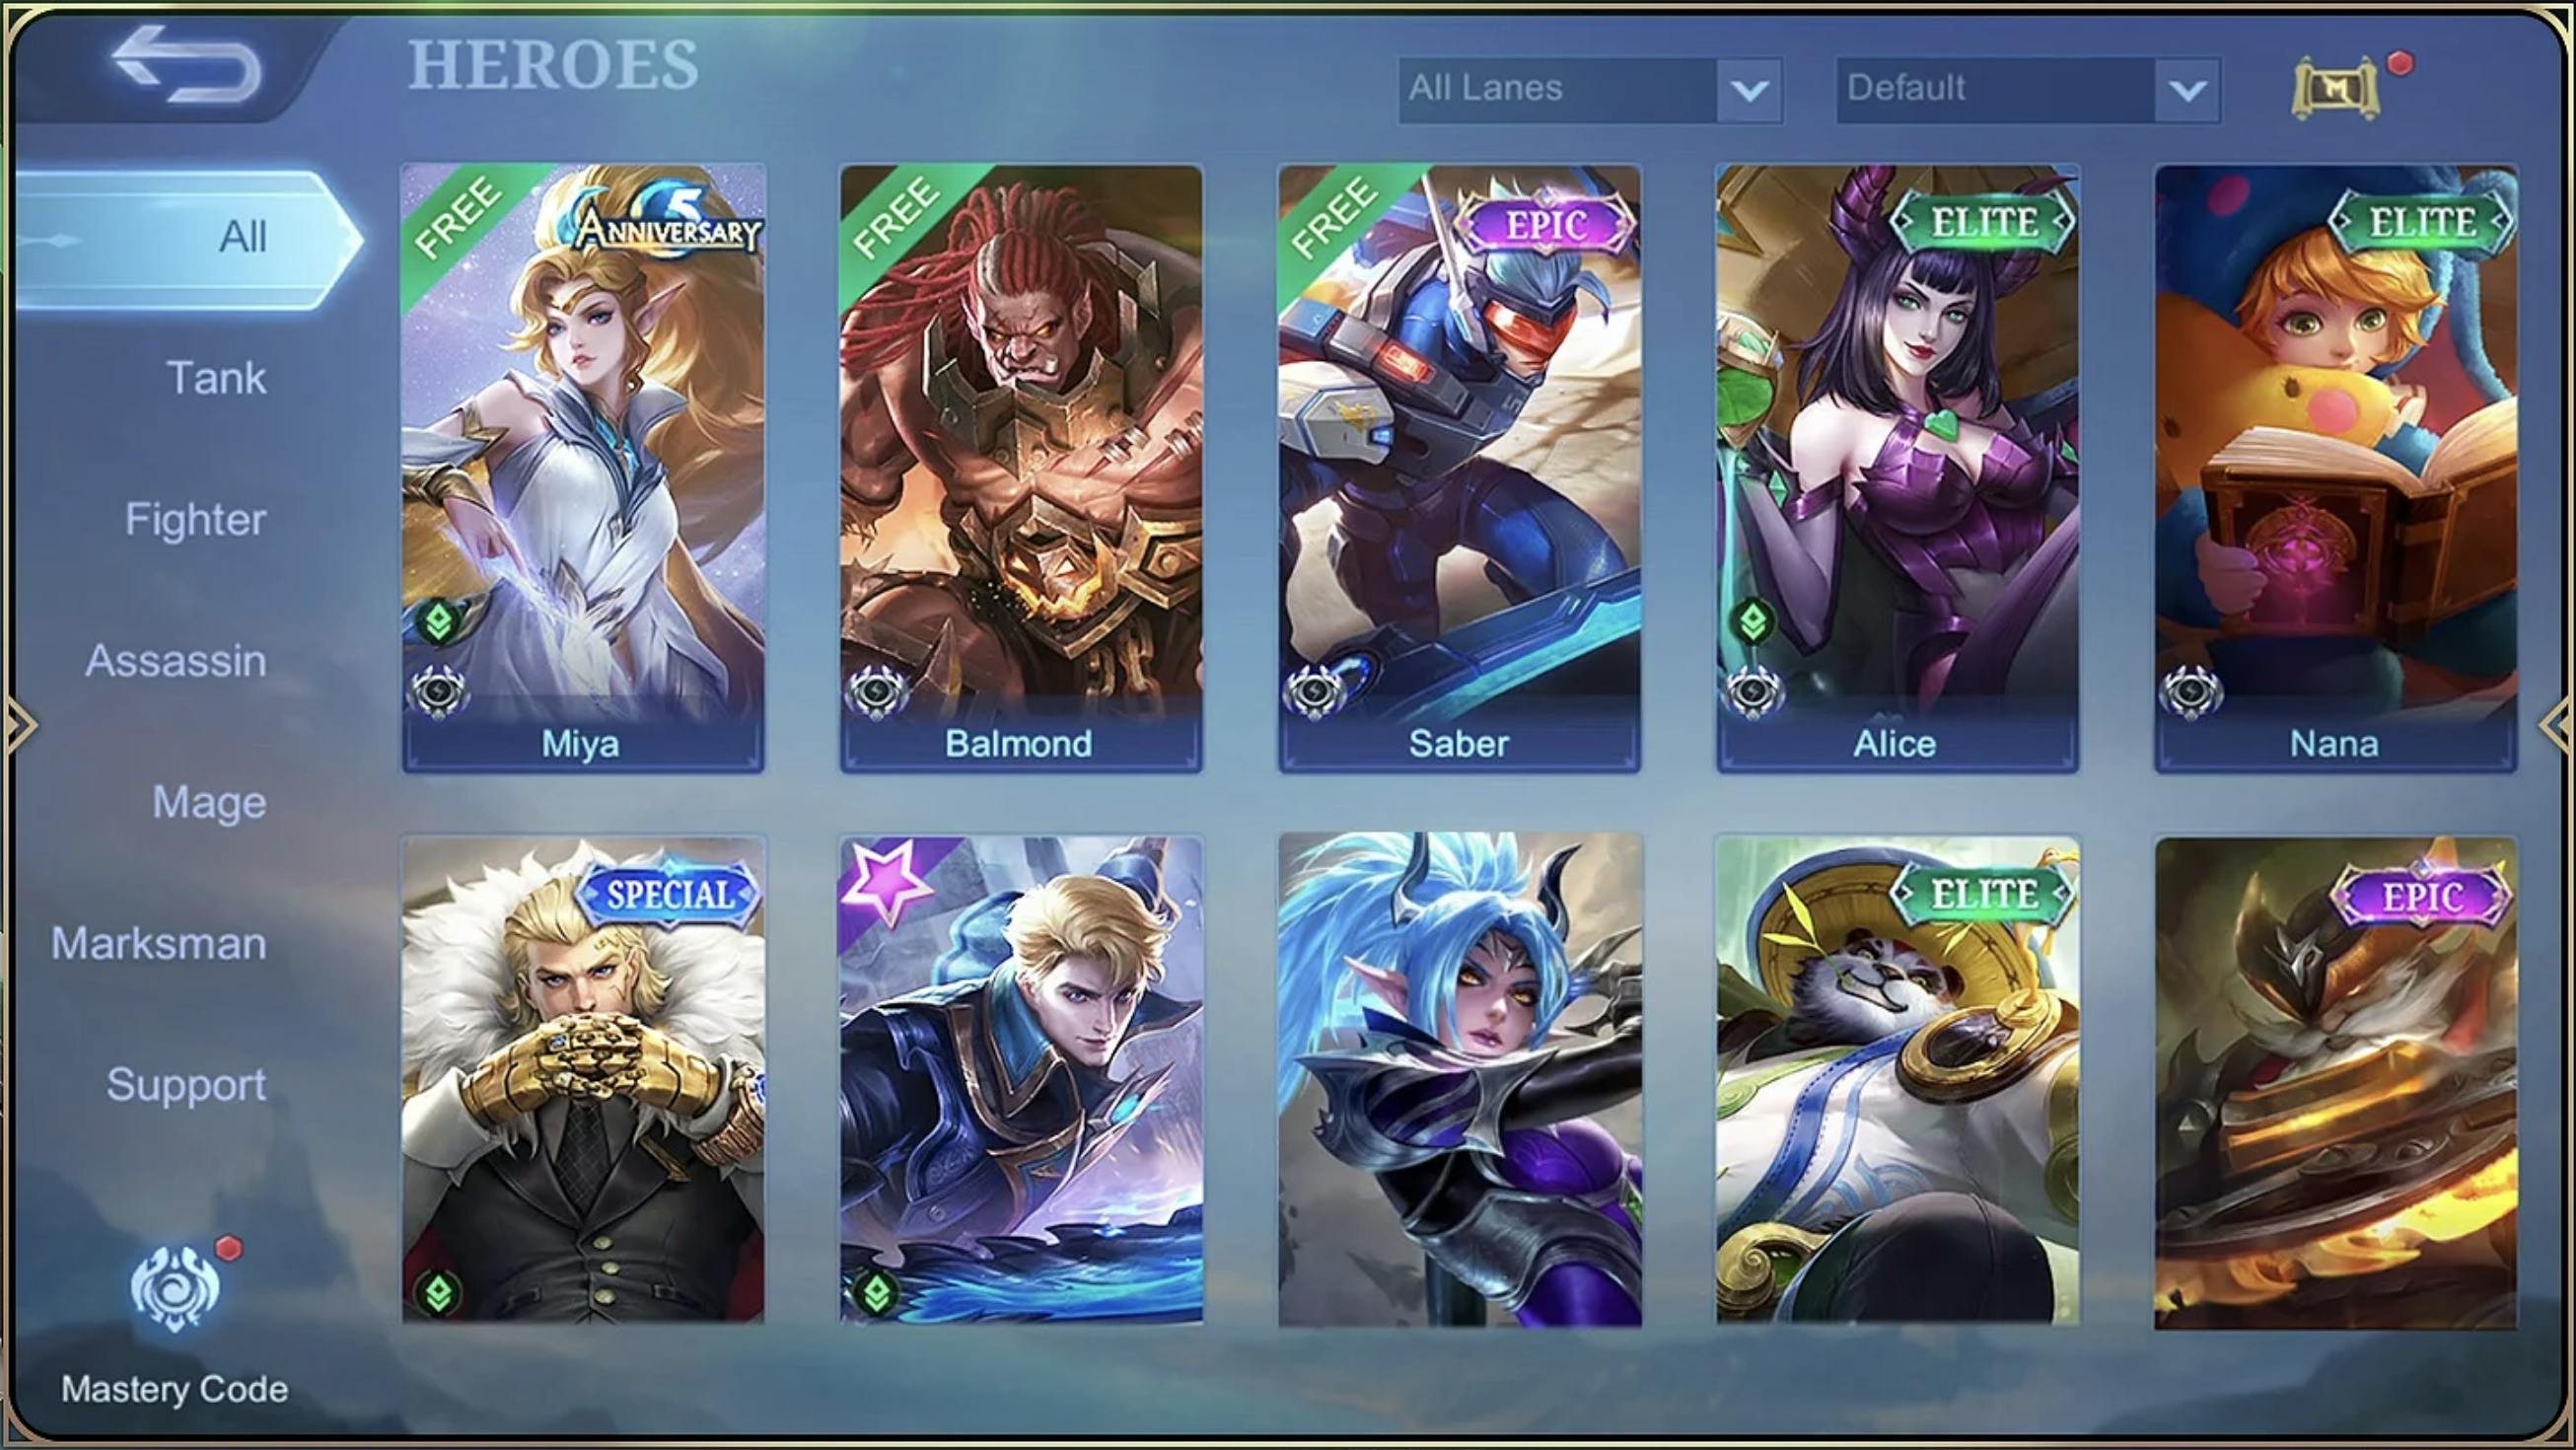 MOBILE LEGENDS MO PLAY TO EARN NA!?